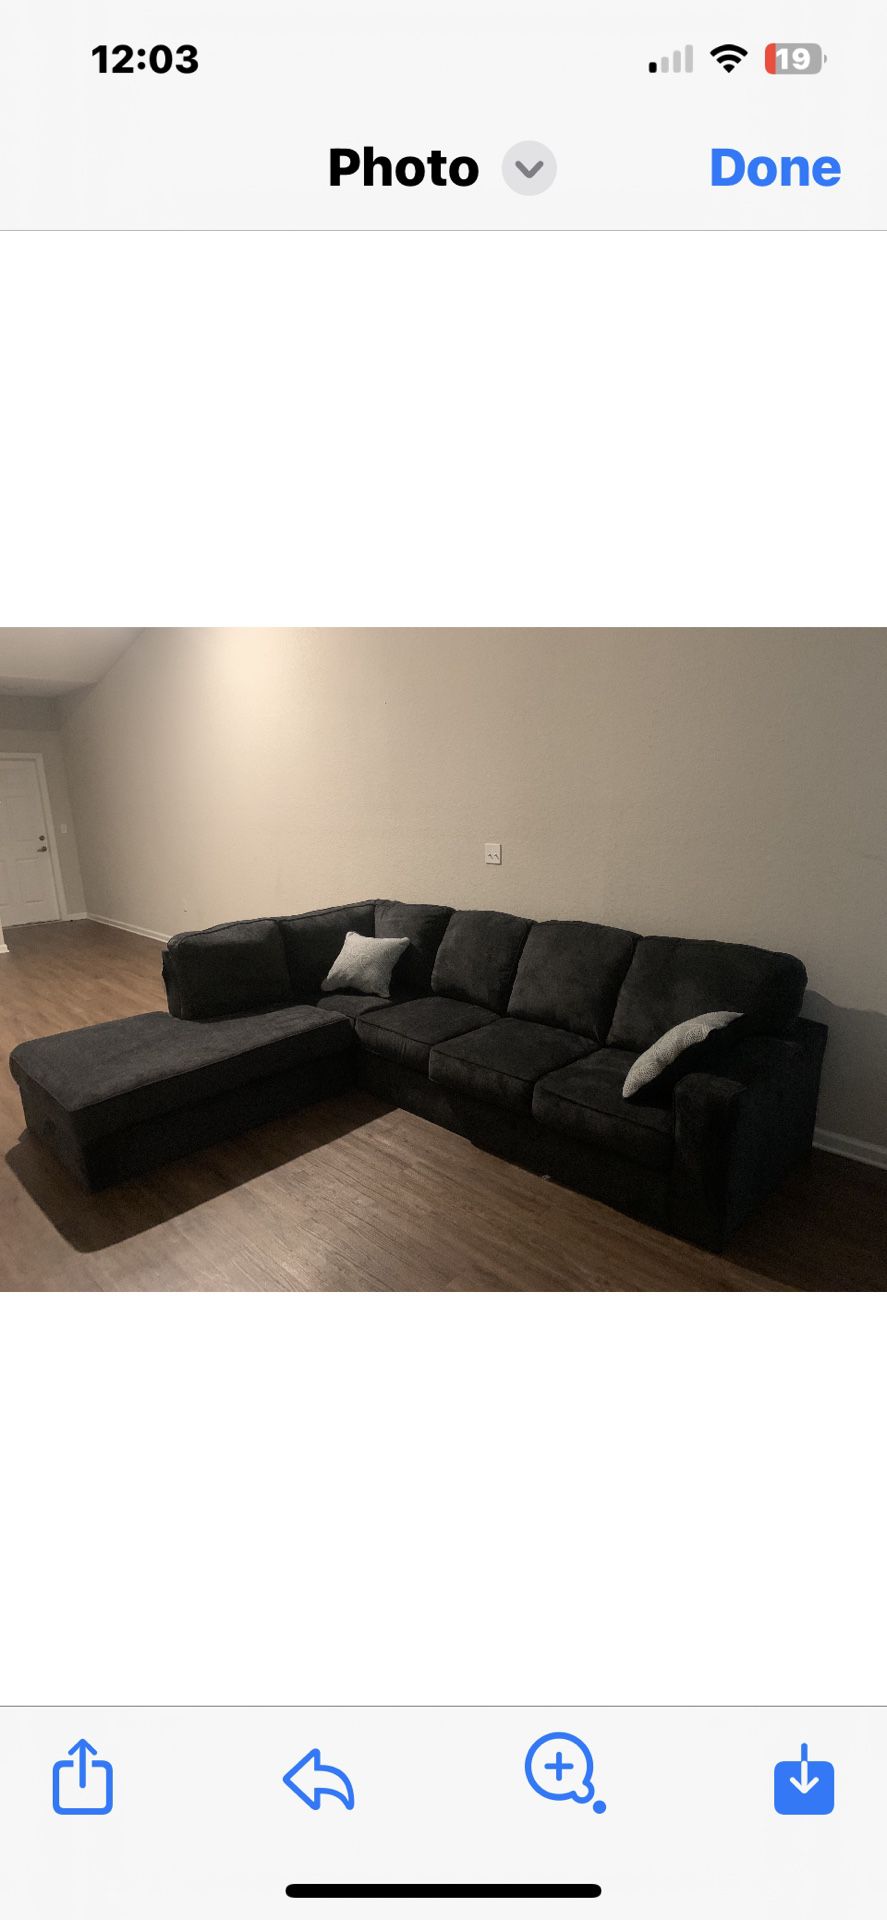 Marleton 2 Piece Sectional With Chaise